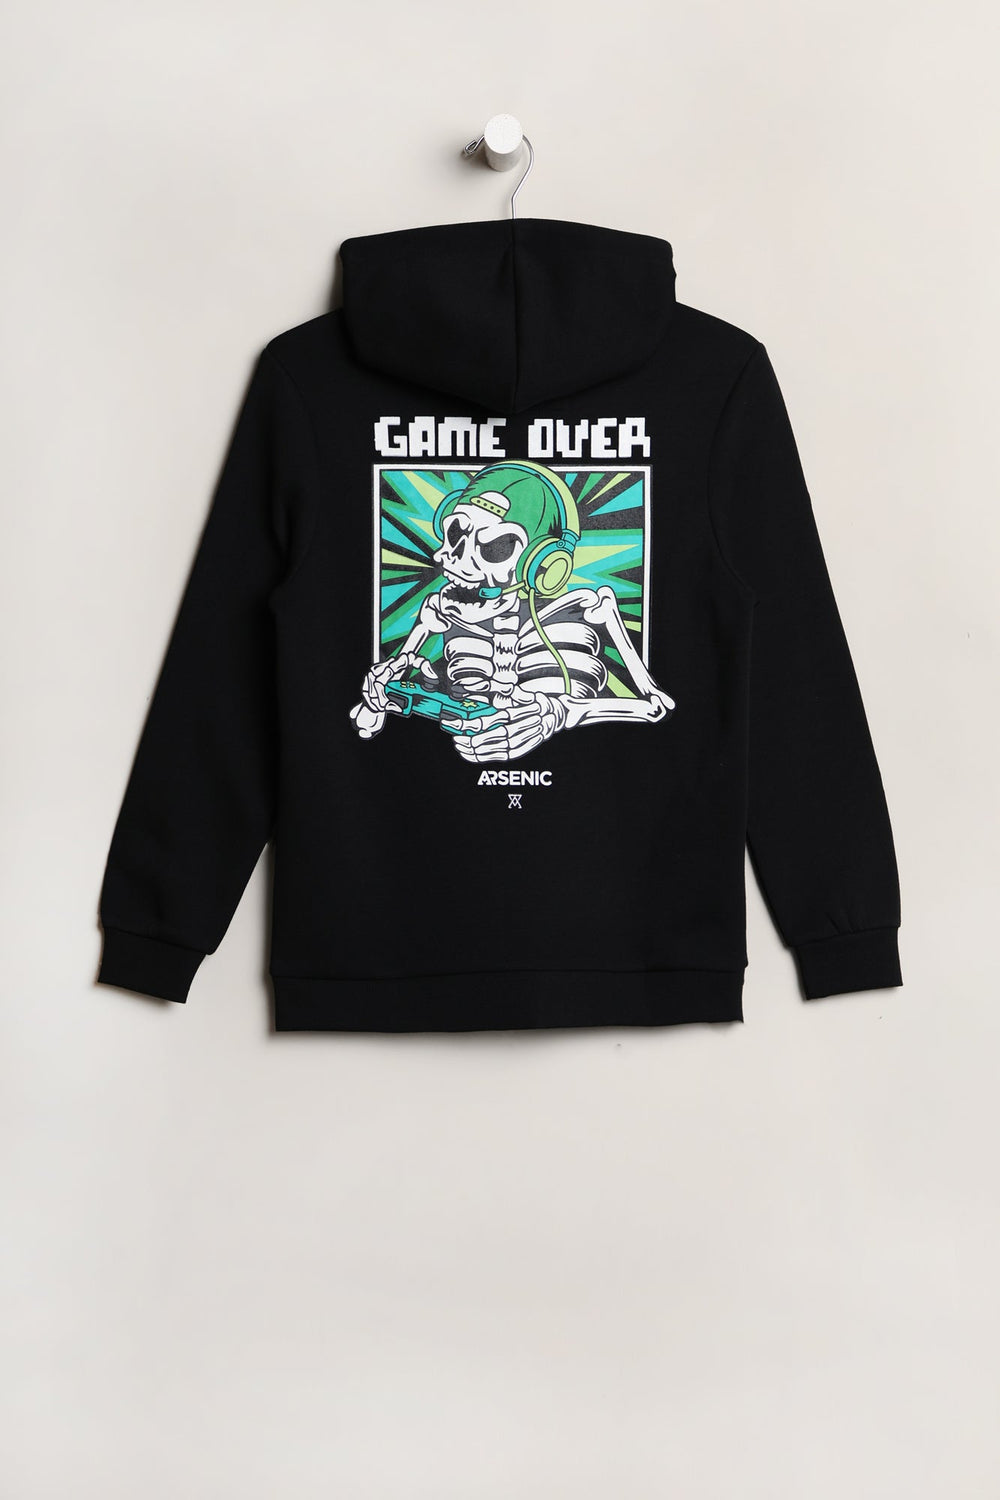 Arsenic Youth Game Over Hoodie Arsenic Youth Game Over Hoodie